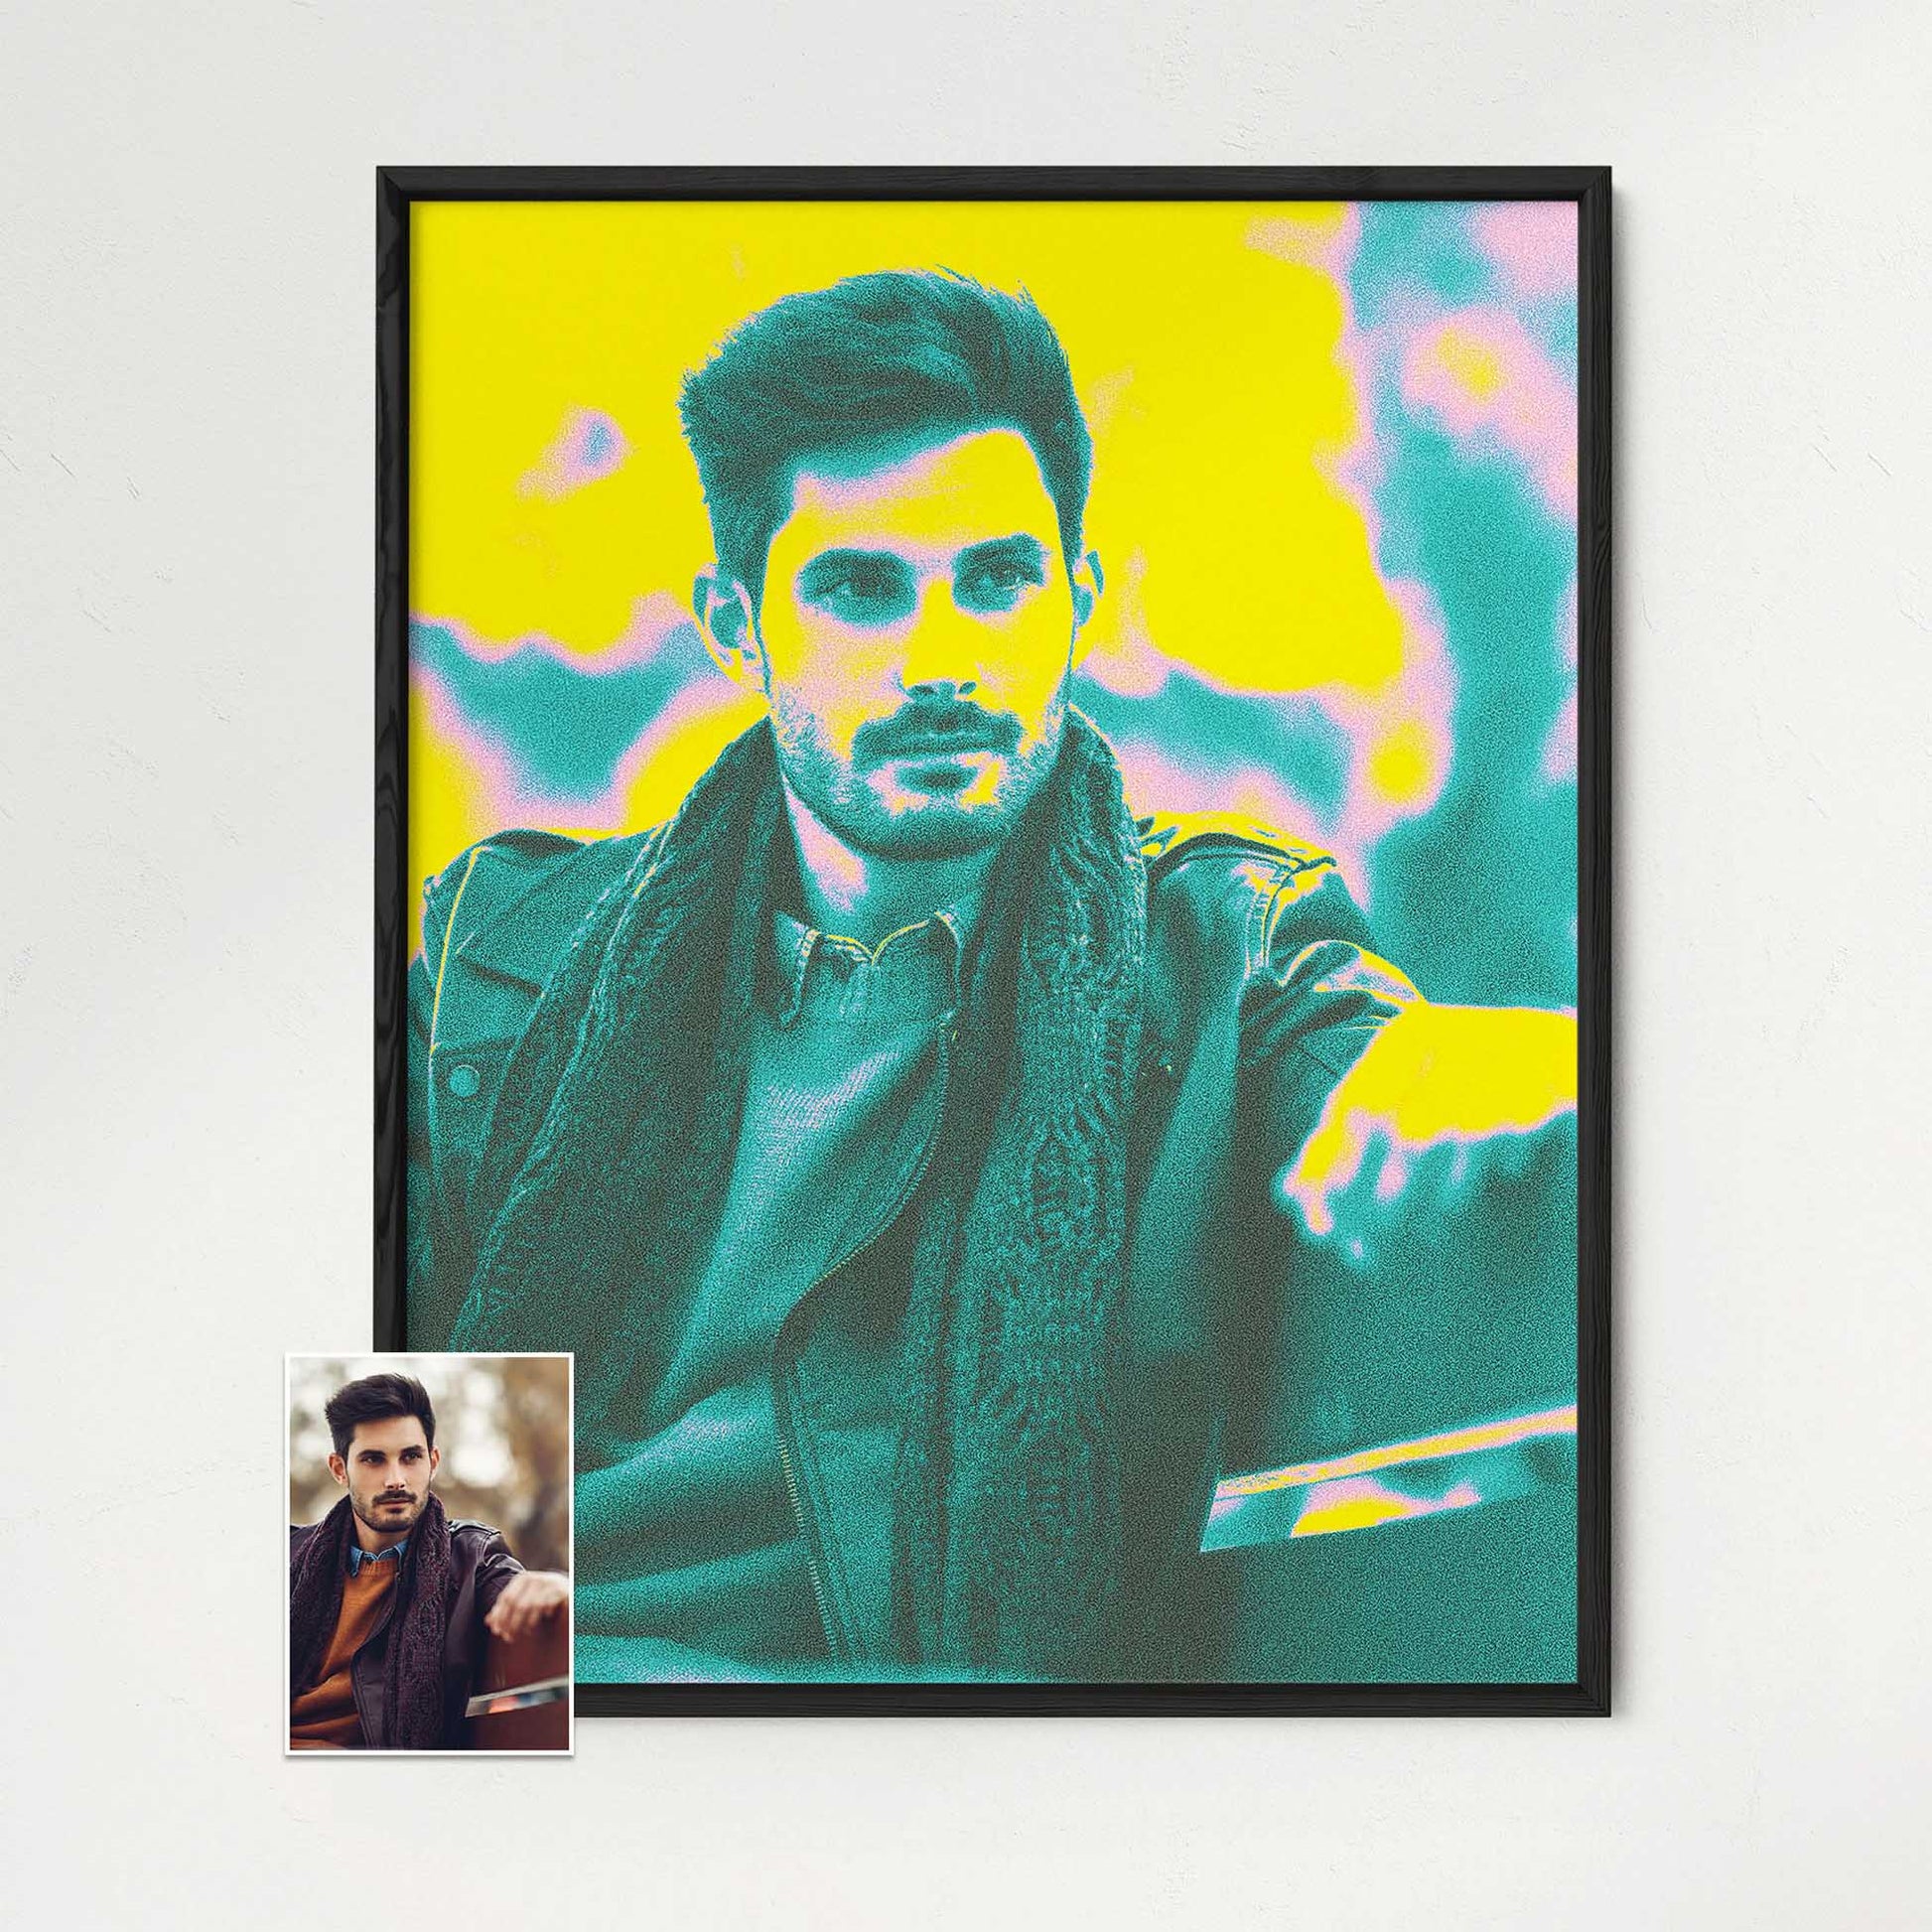 Make a bold statement with a Personalised Acid Yellow Framed Print. Its vibrant and bright colors create a vivid and colorful focal point in your home decor. Crafted with a wooden frame and printed on museum-quality paper